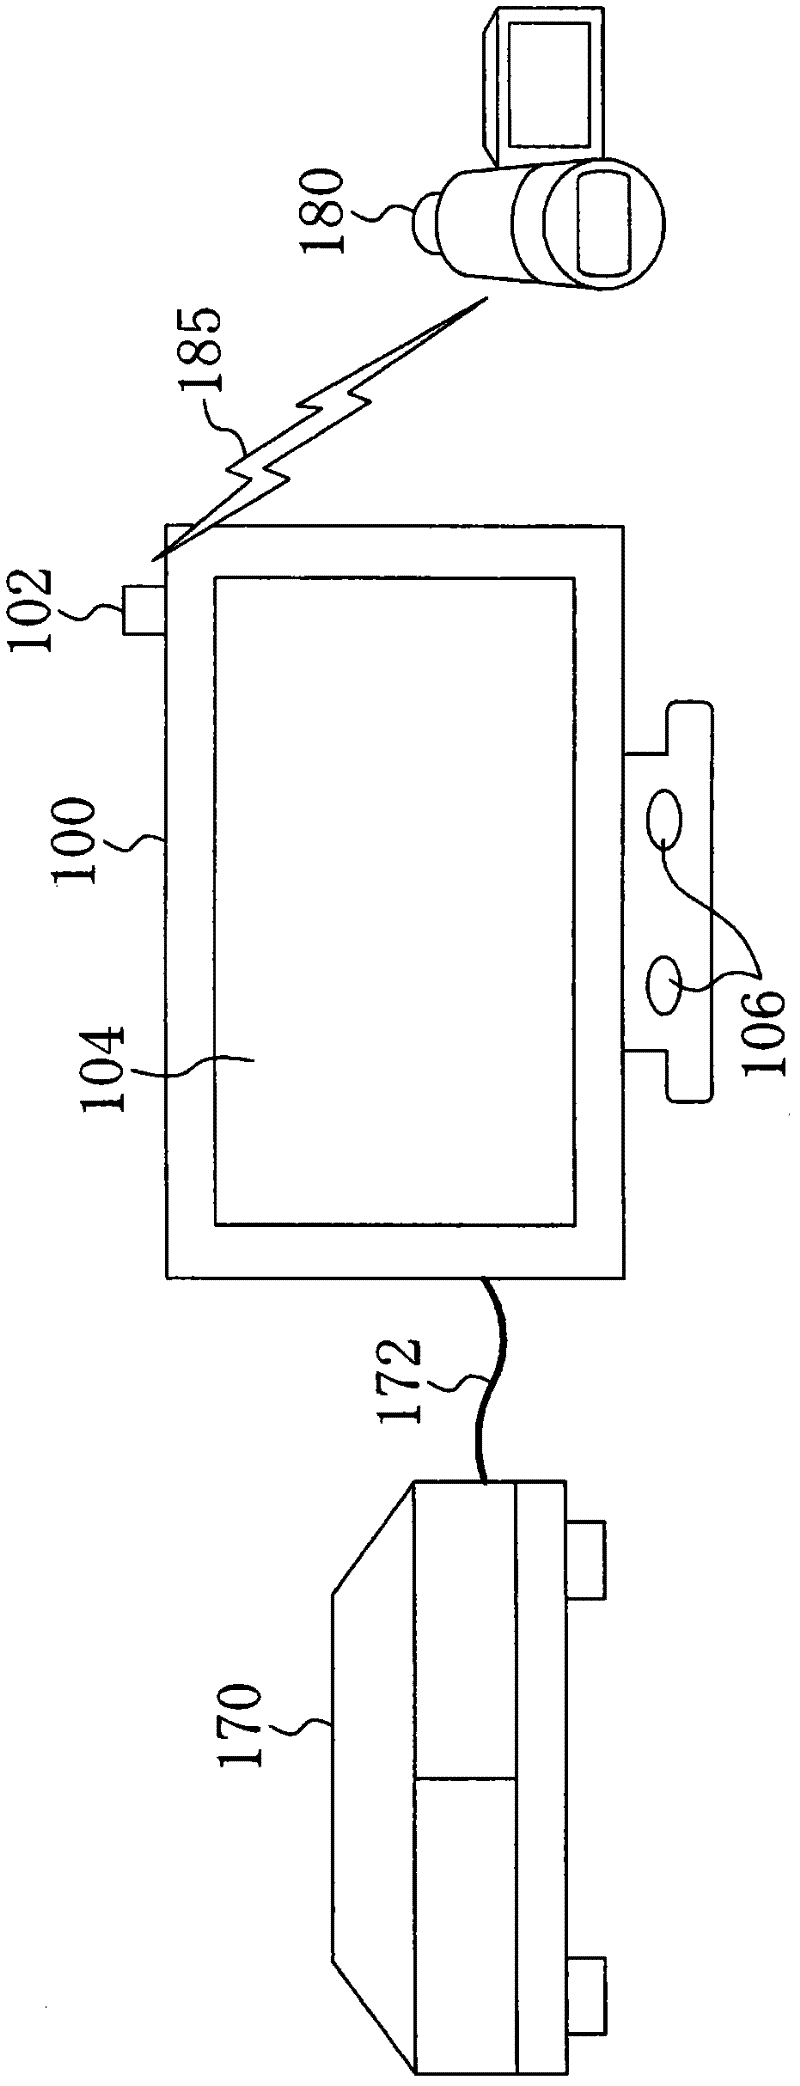 Receiving device, signal processing device and image display